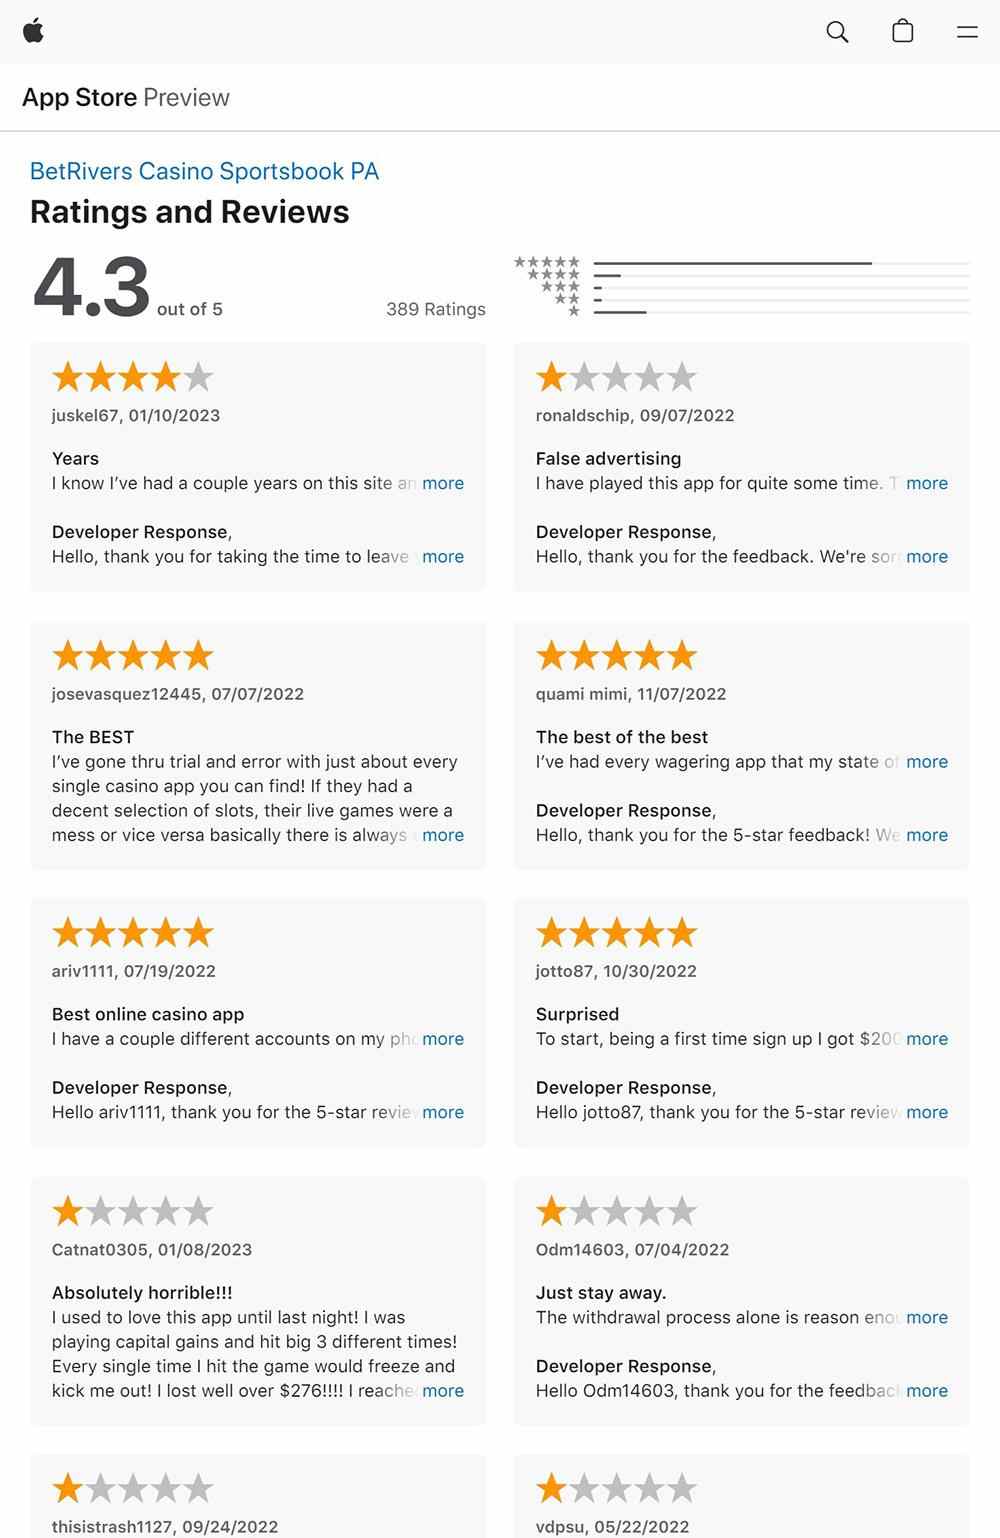 Apple App store ratings and reviews for the BetRivers PA